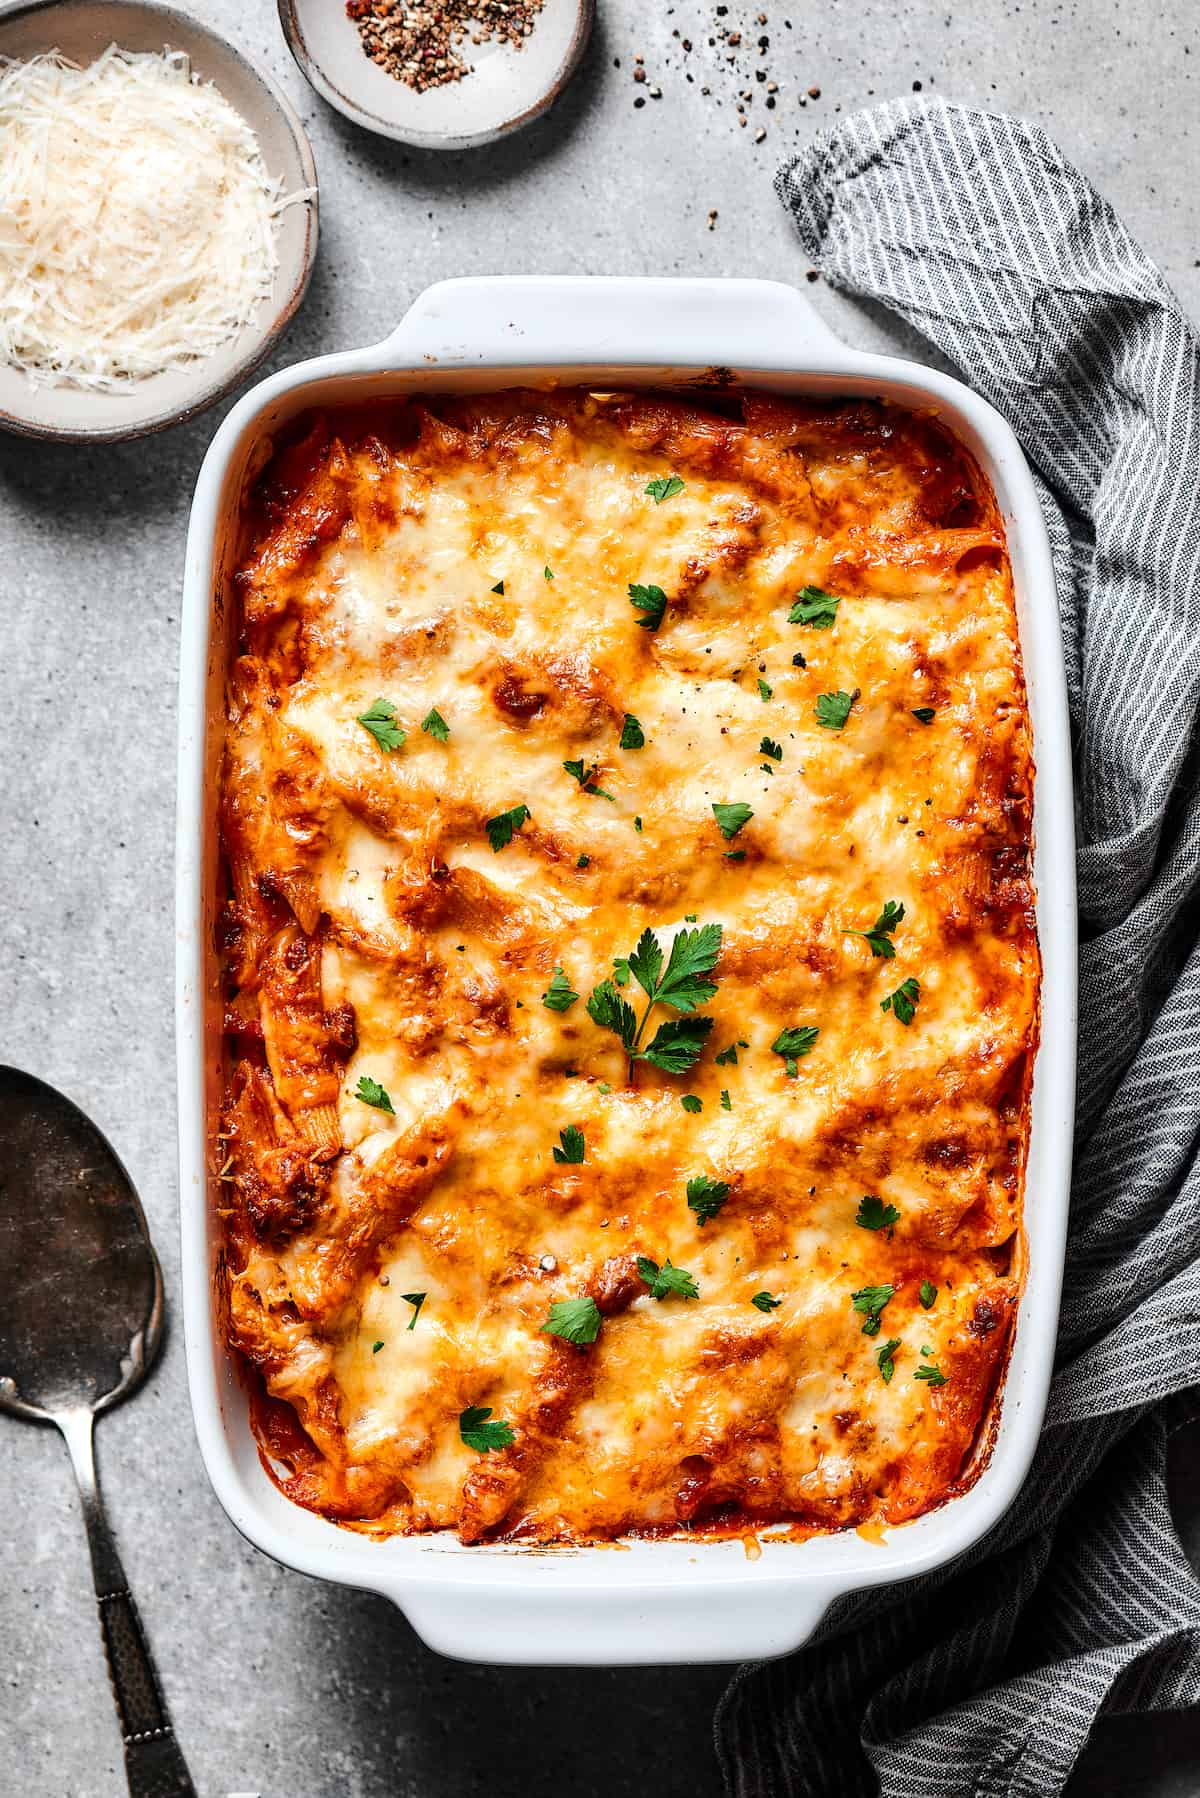 Baked mostaccioli garnished with herbs.